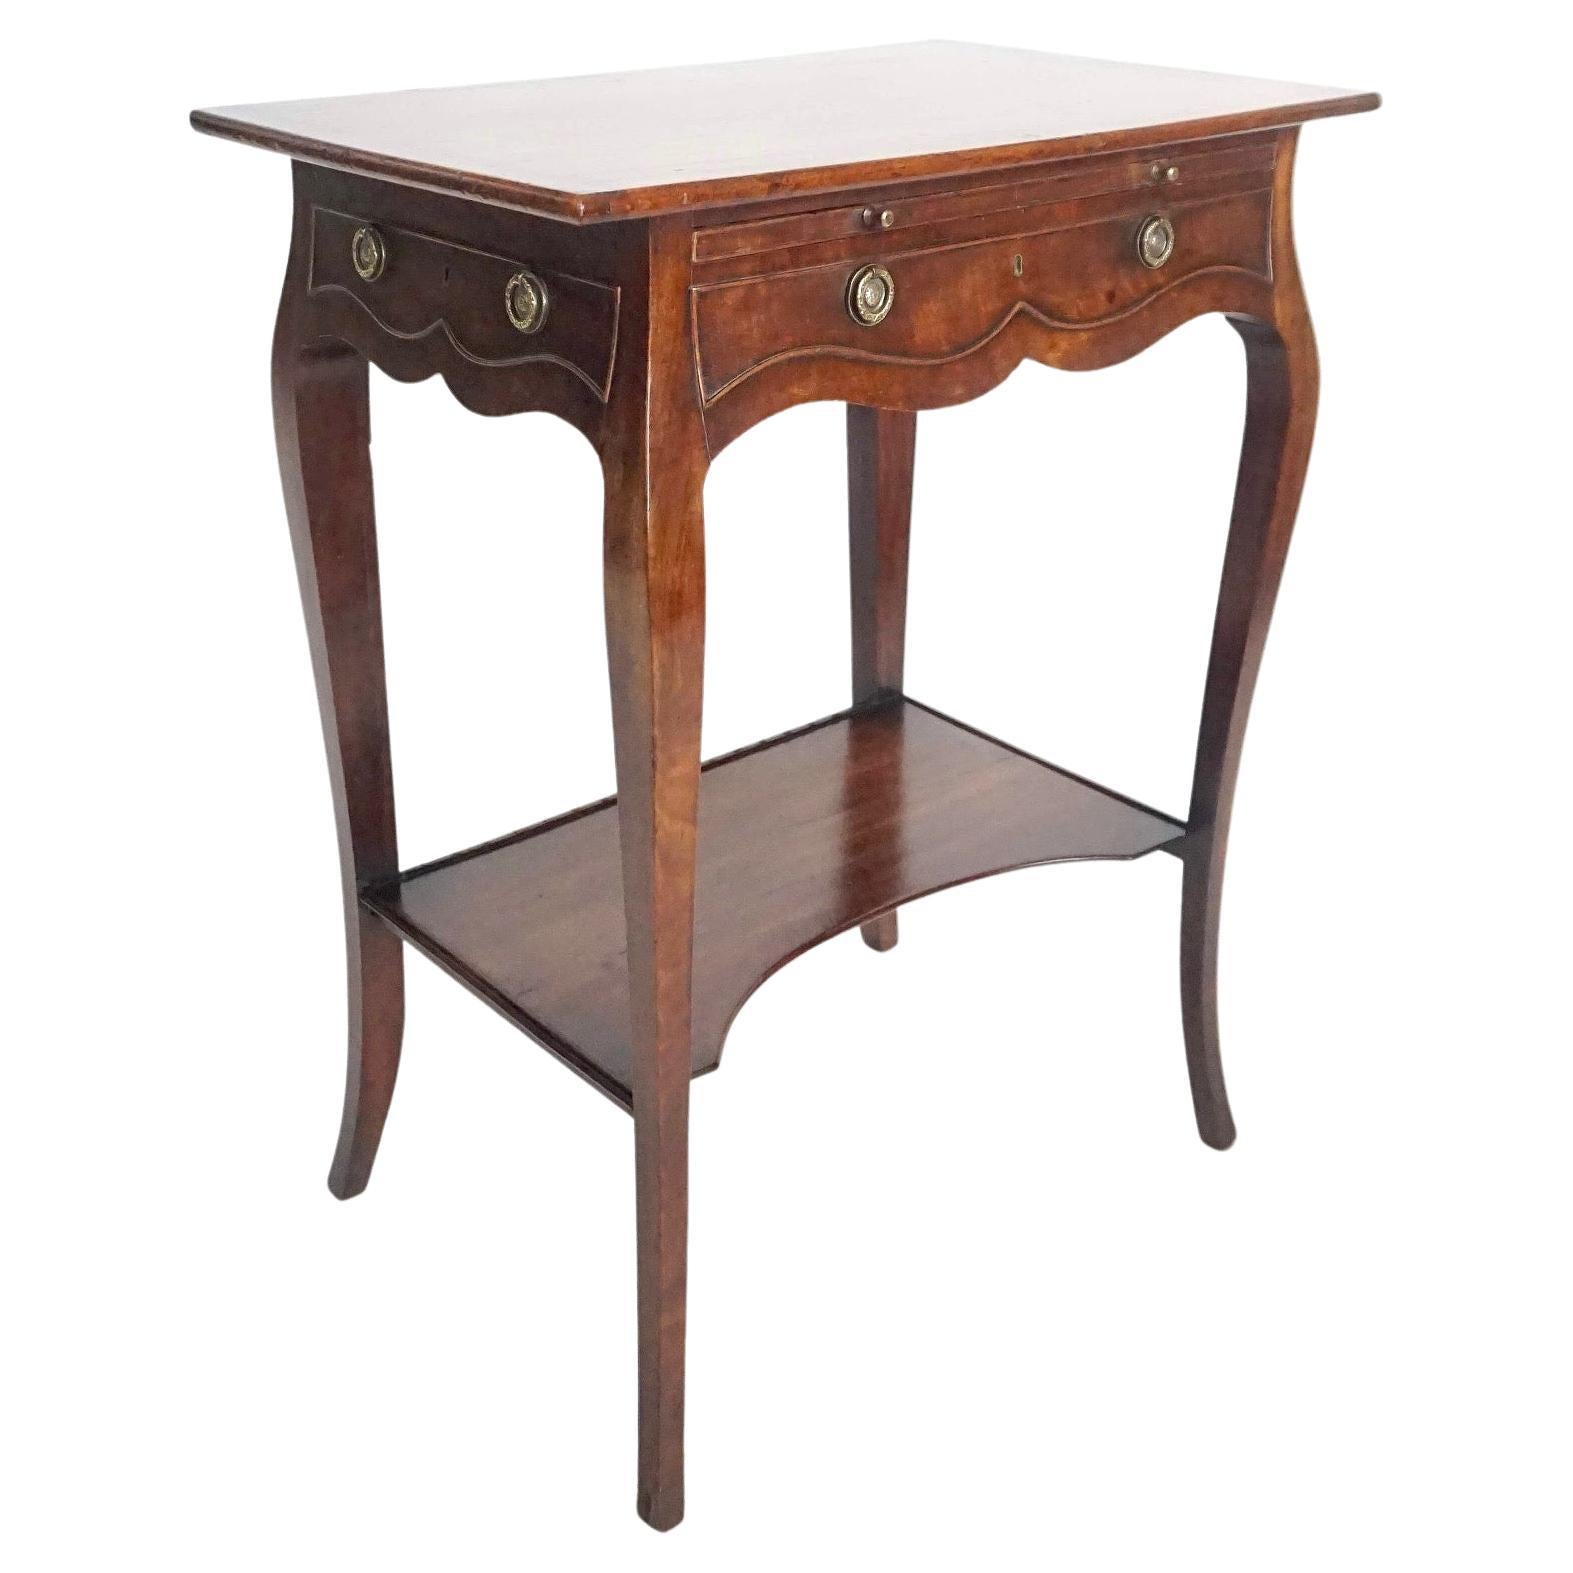 English George III Sabicu & Gonçalo Alves Work Table in the Manner of John Cobb For Sale